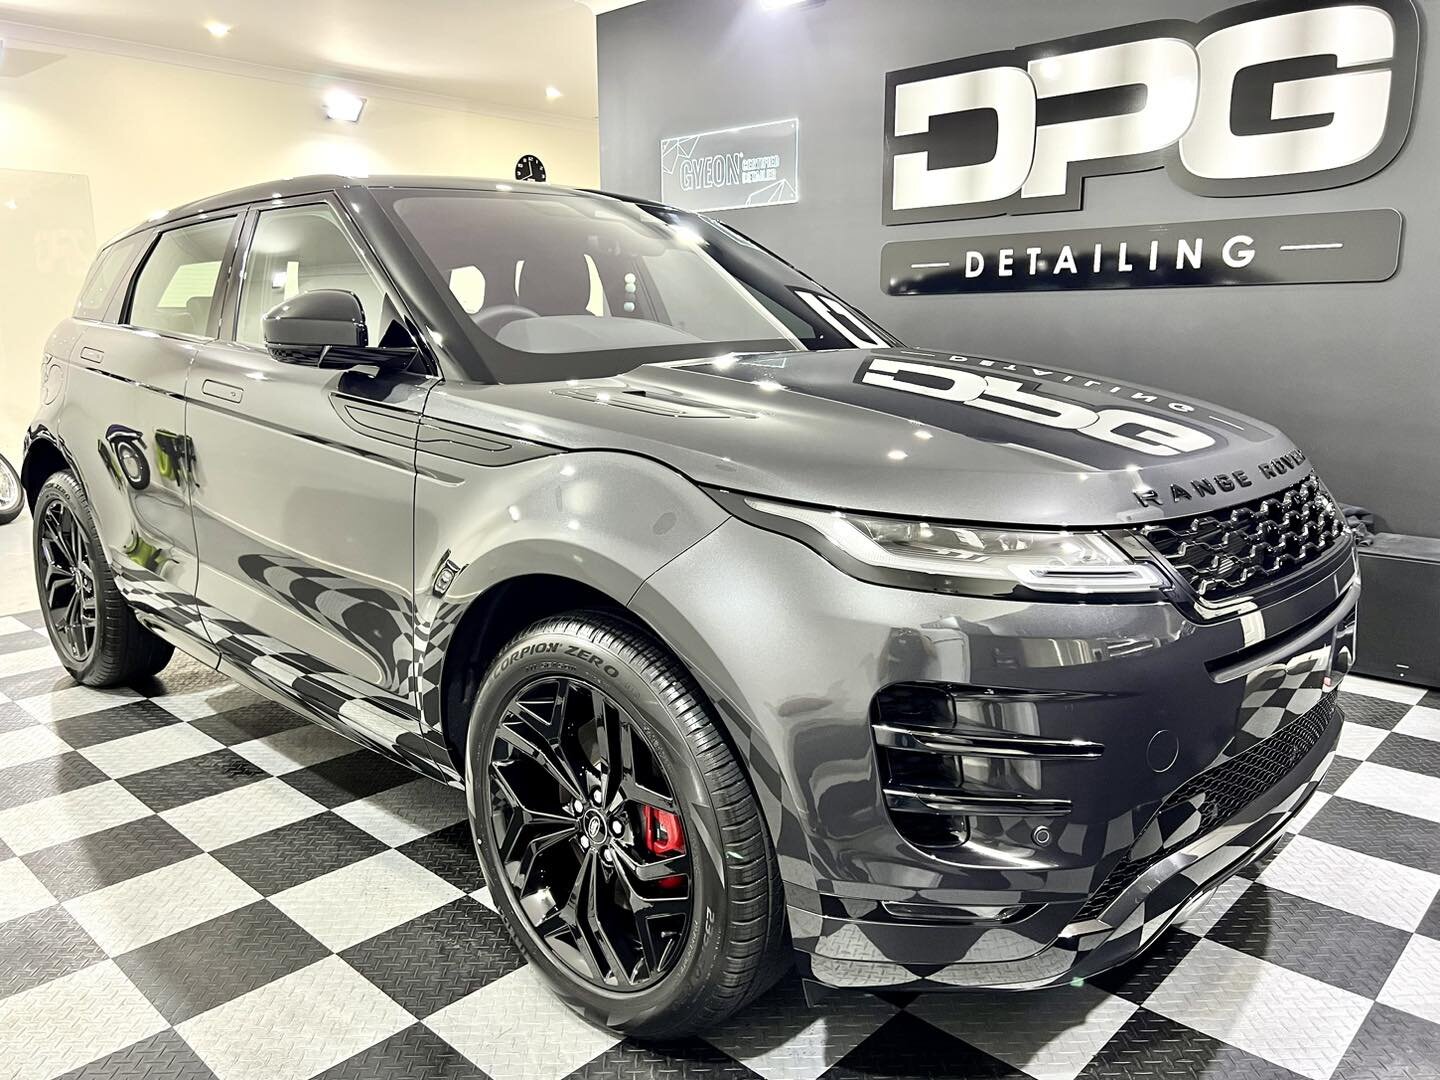 ⭐️⭐️ 2022 RANGE ROVER EVOQUE ⭐️⭐️

This brand new little Rover came to us only 2 days after the owner drove it off the showroom. The perfect way to protect your new investment. 
From Dealership to DPG. 

🤔 Do you have a new car on order? With longer